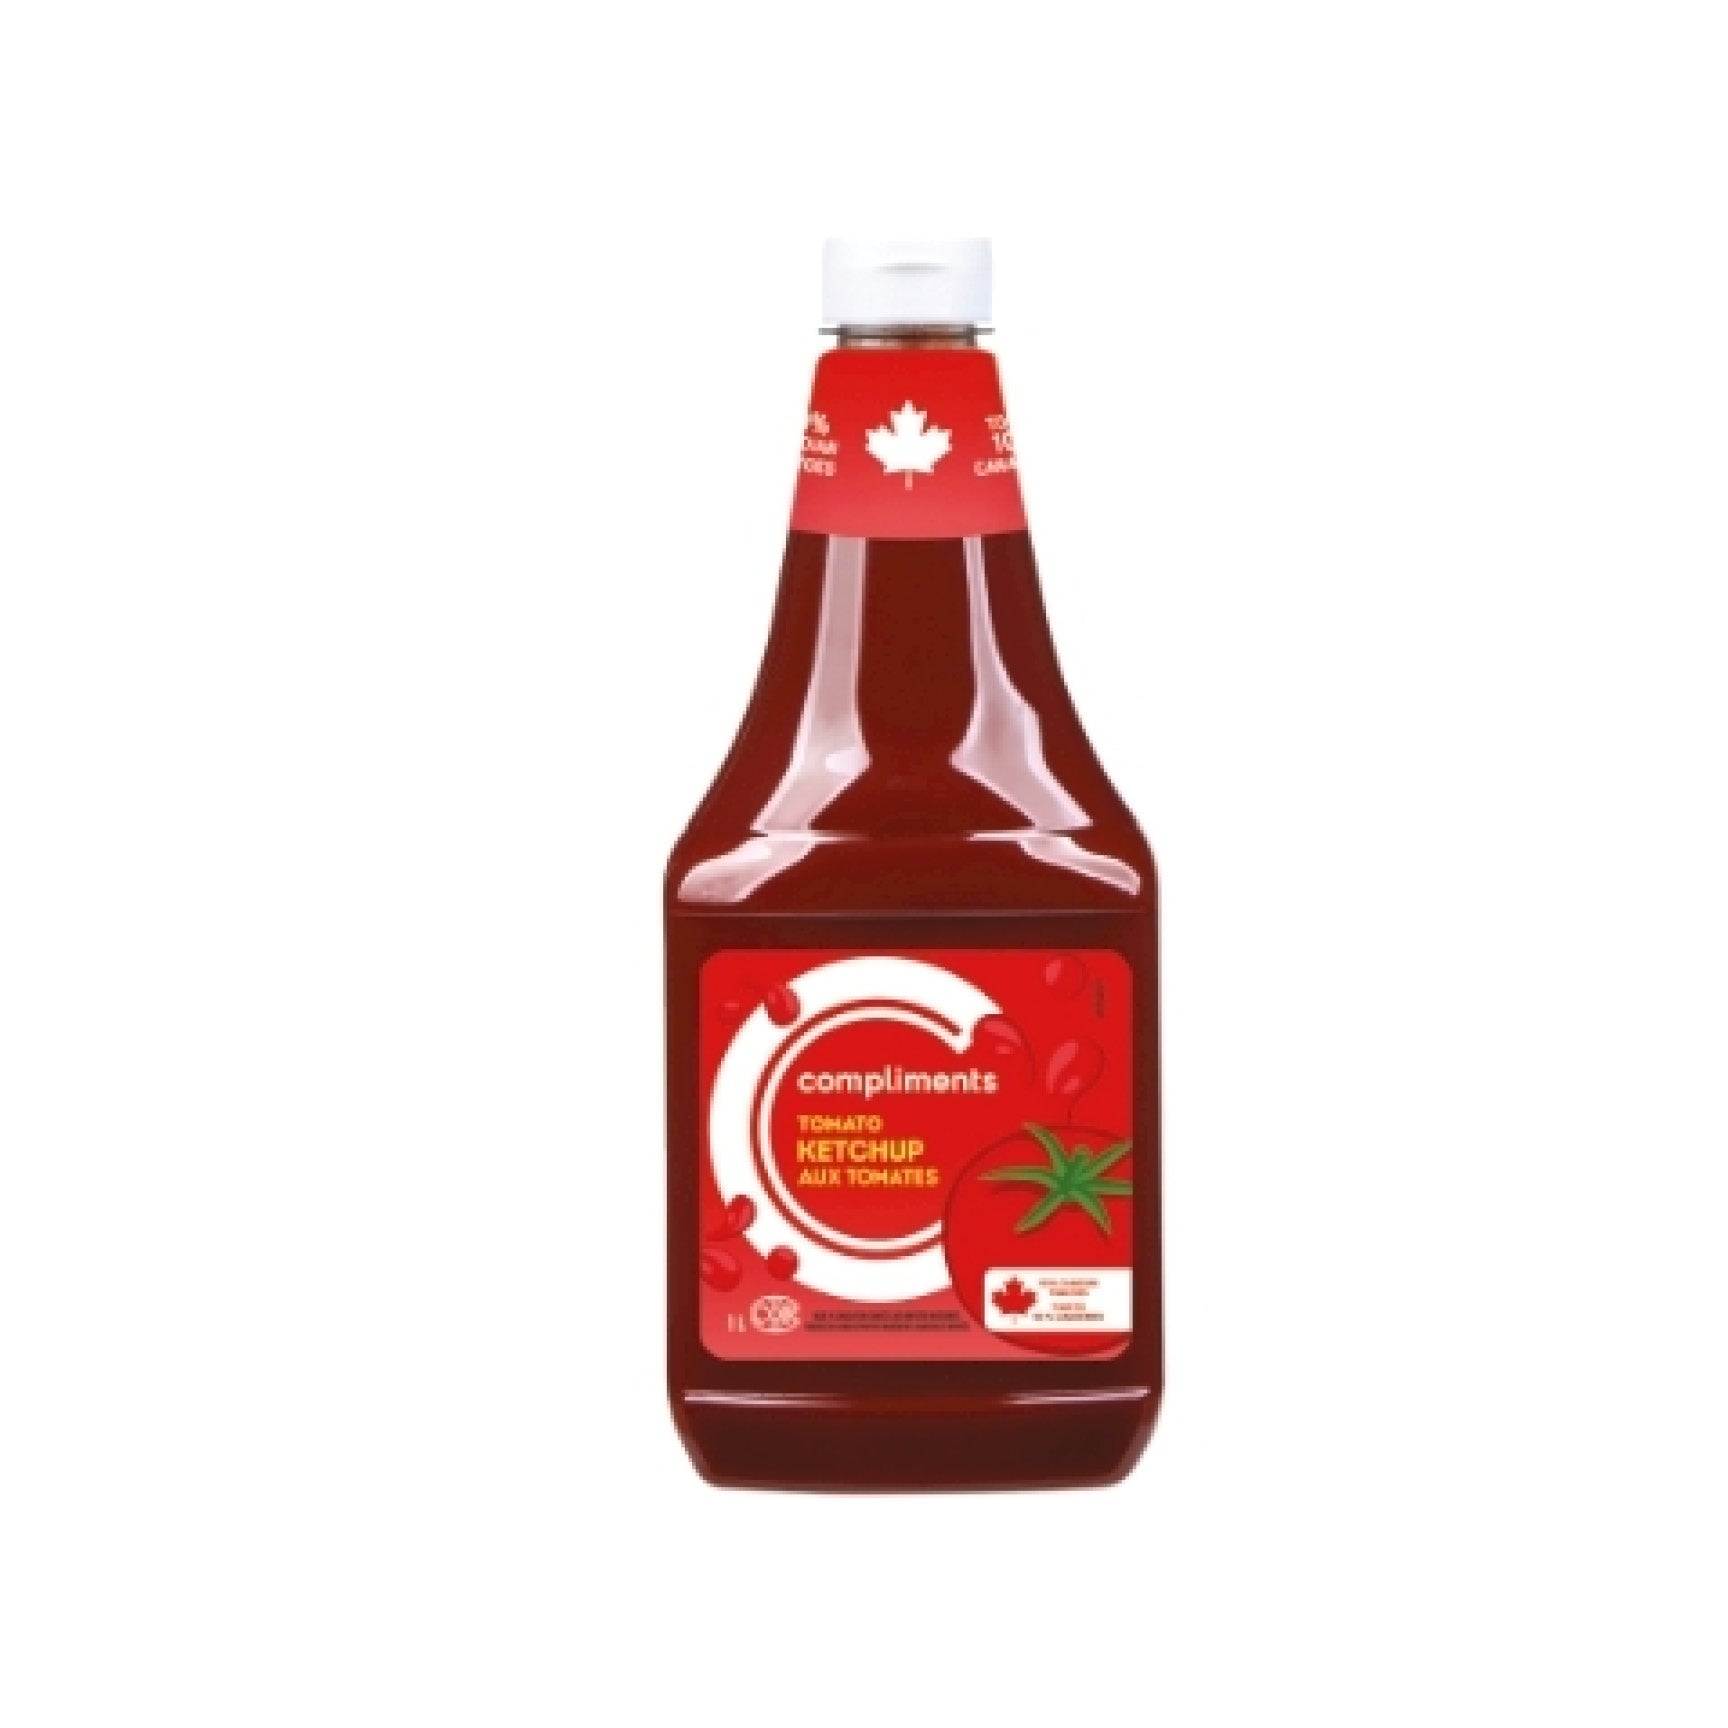 Compliments Tomato Ketchup, 1L